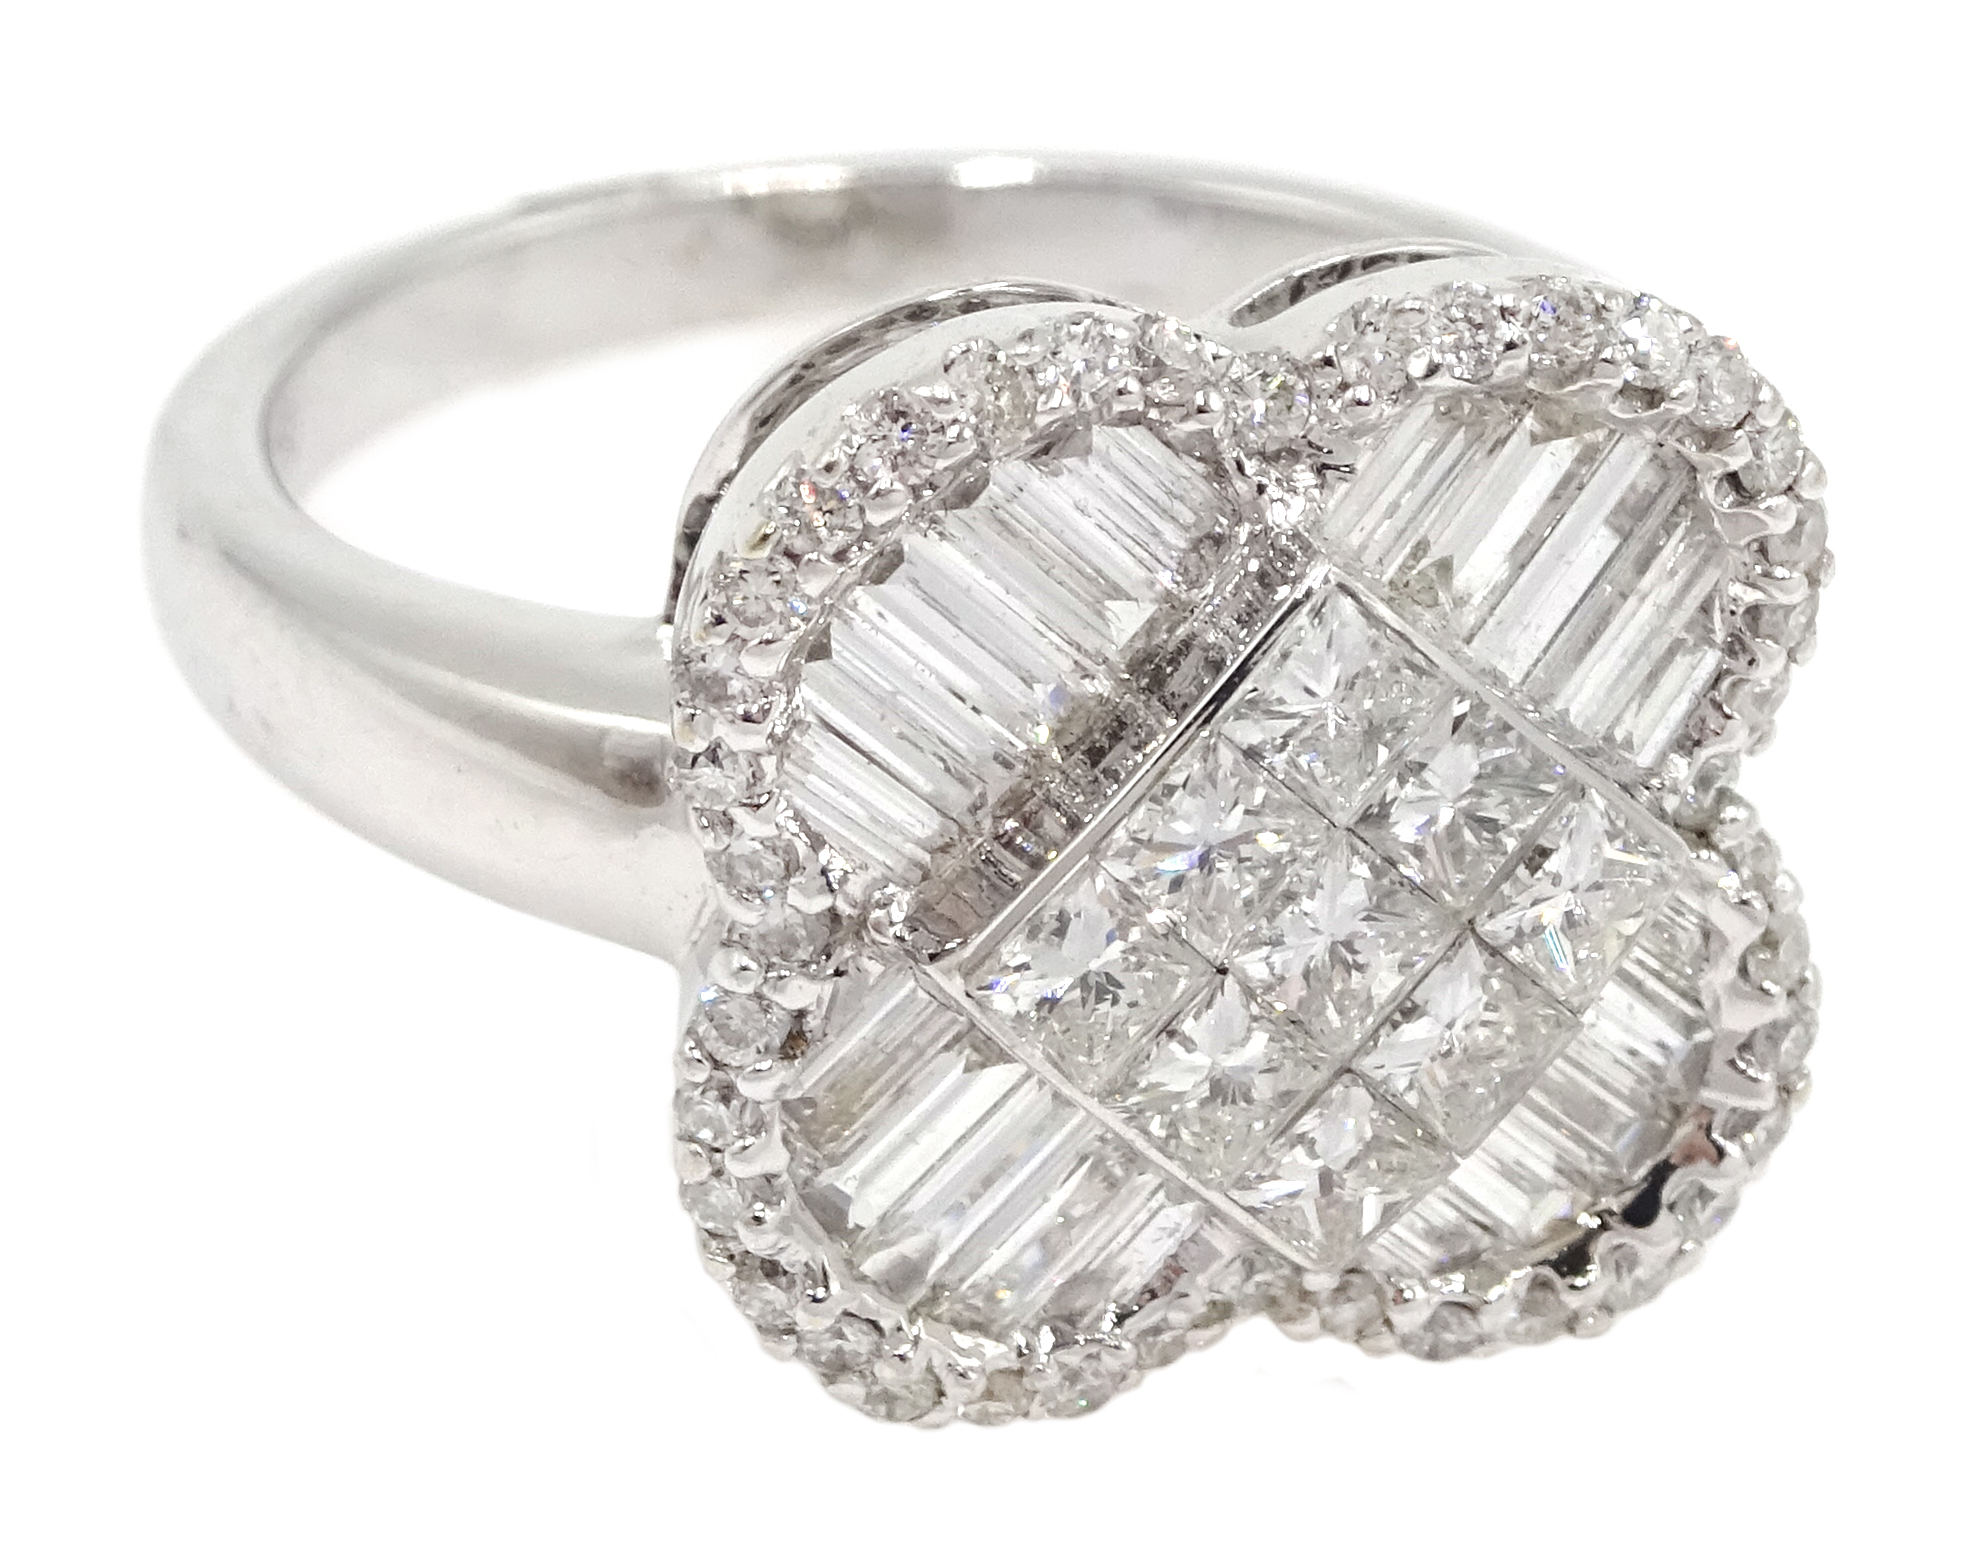 18ct white gold and diamond cluster ring, diamond total weight approx 1.25 carat - Image 3 of 6